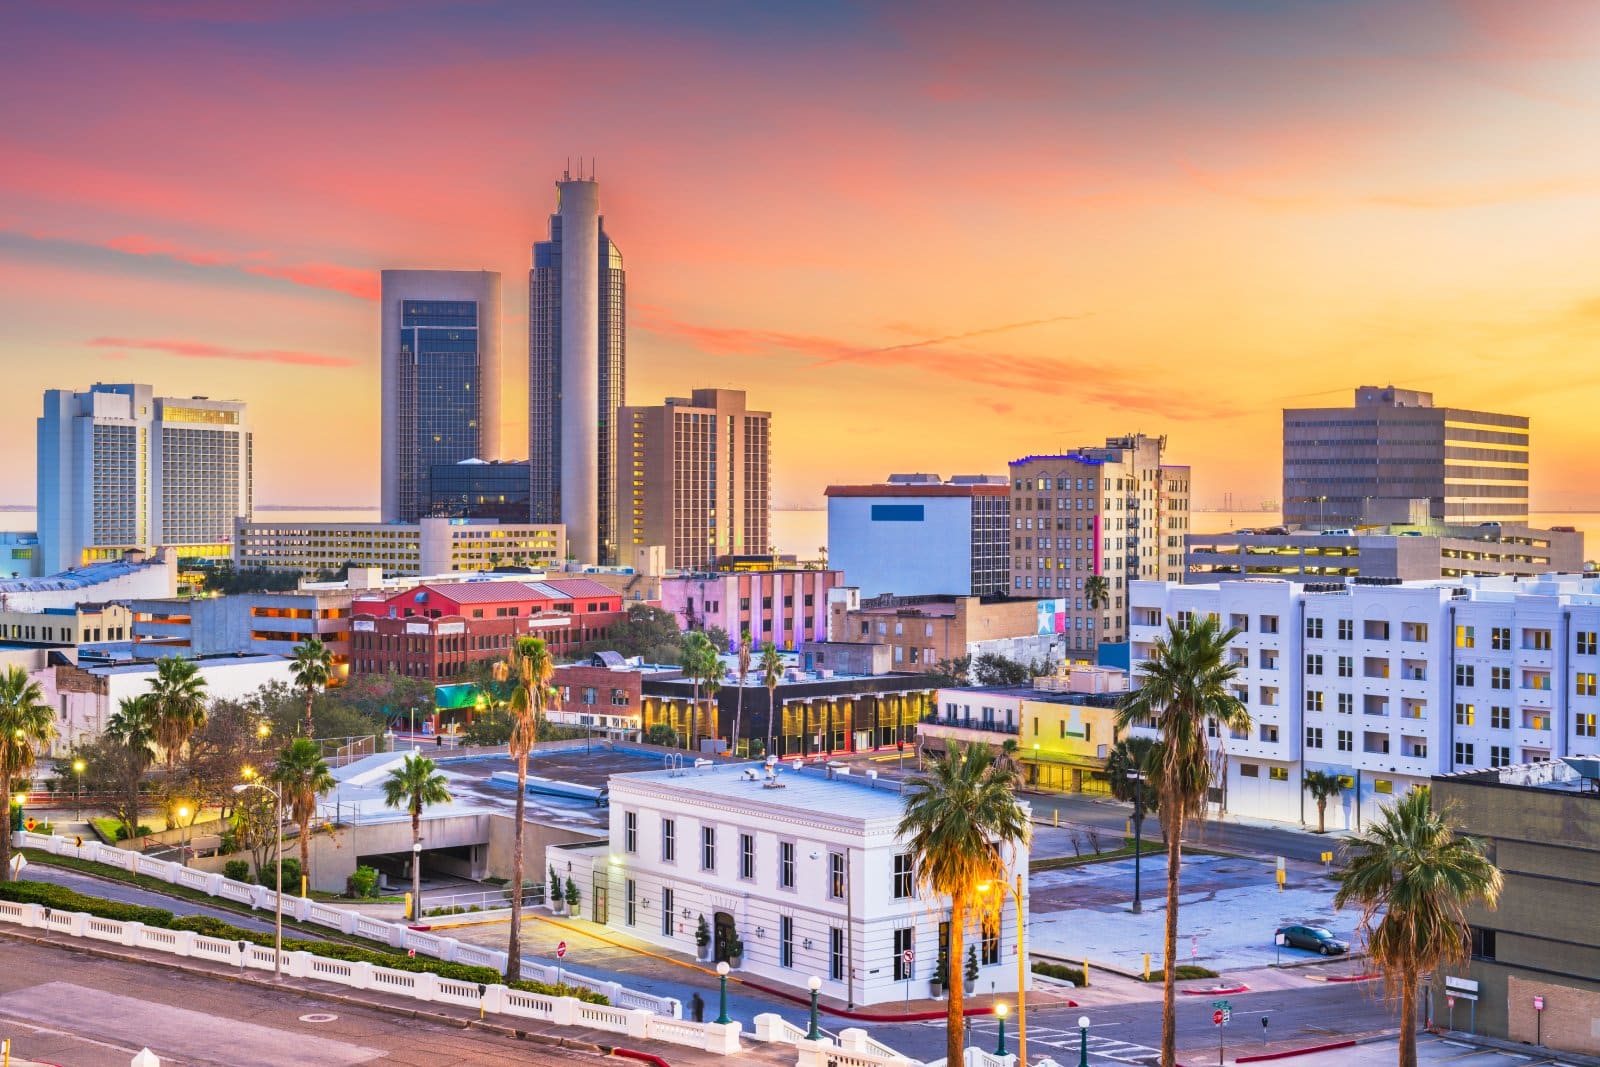 Image Credit: Shutterstock / Sean Pavone <p>Texas is becoming a beacon of opportunity, blending cultural heritage with economic growth. From its landscapes to its industries, the Lone Star State offers a dynamic lifestyle. Here are 23 reasons why Texas stands out, attracting entrepreneurs, artists, tech professionals, and families seeking new beginnings. <strong><a href="https://wealthyliving.com/23-reasons-why-texas-is-up-and-coming/" rel="noopener">23 Reasons Texas Is the Next Big Thing</a></strong></p>